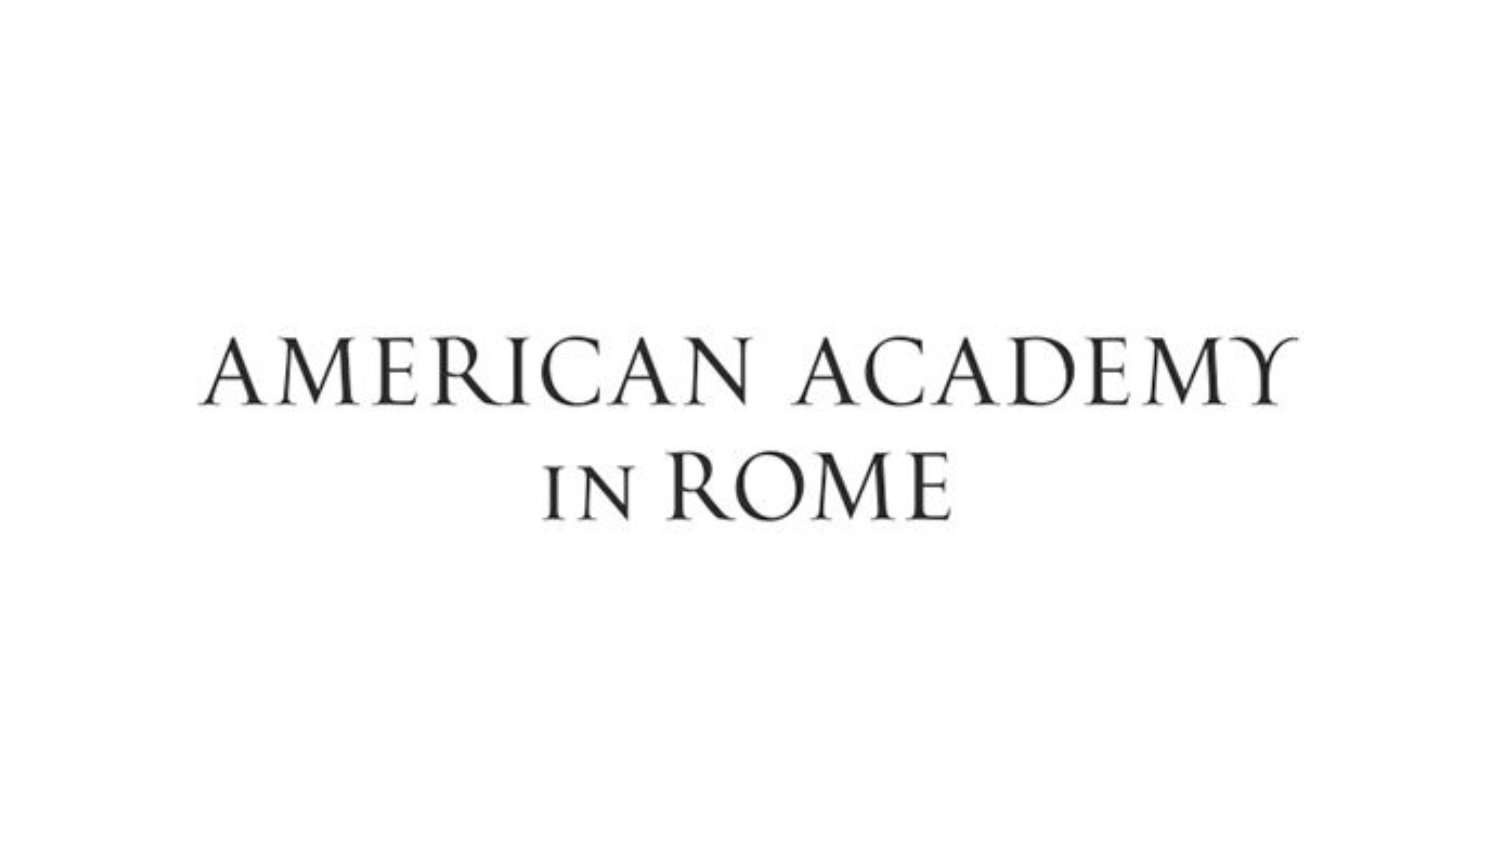 logo of the american academy in rome, with black capital letters and a serif font